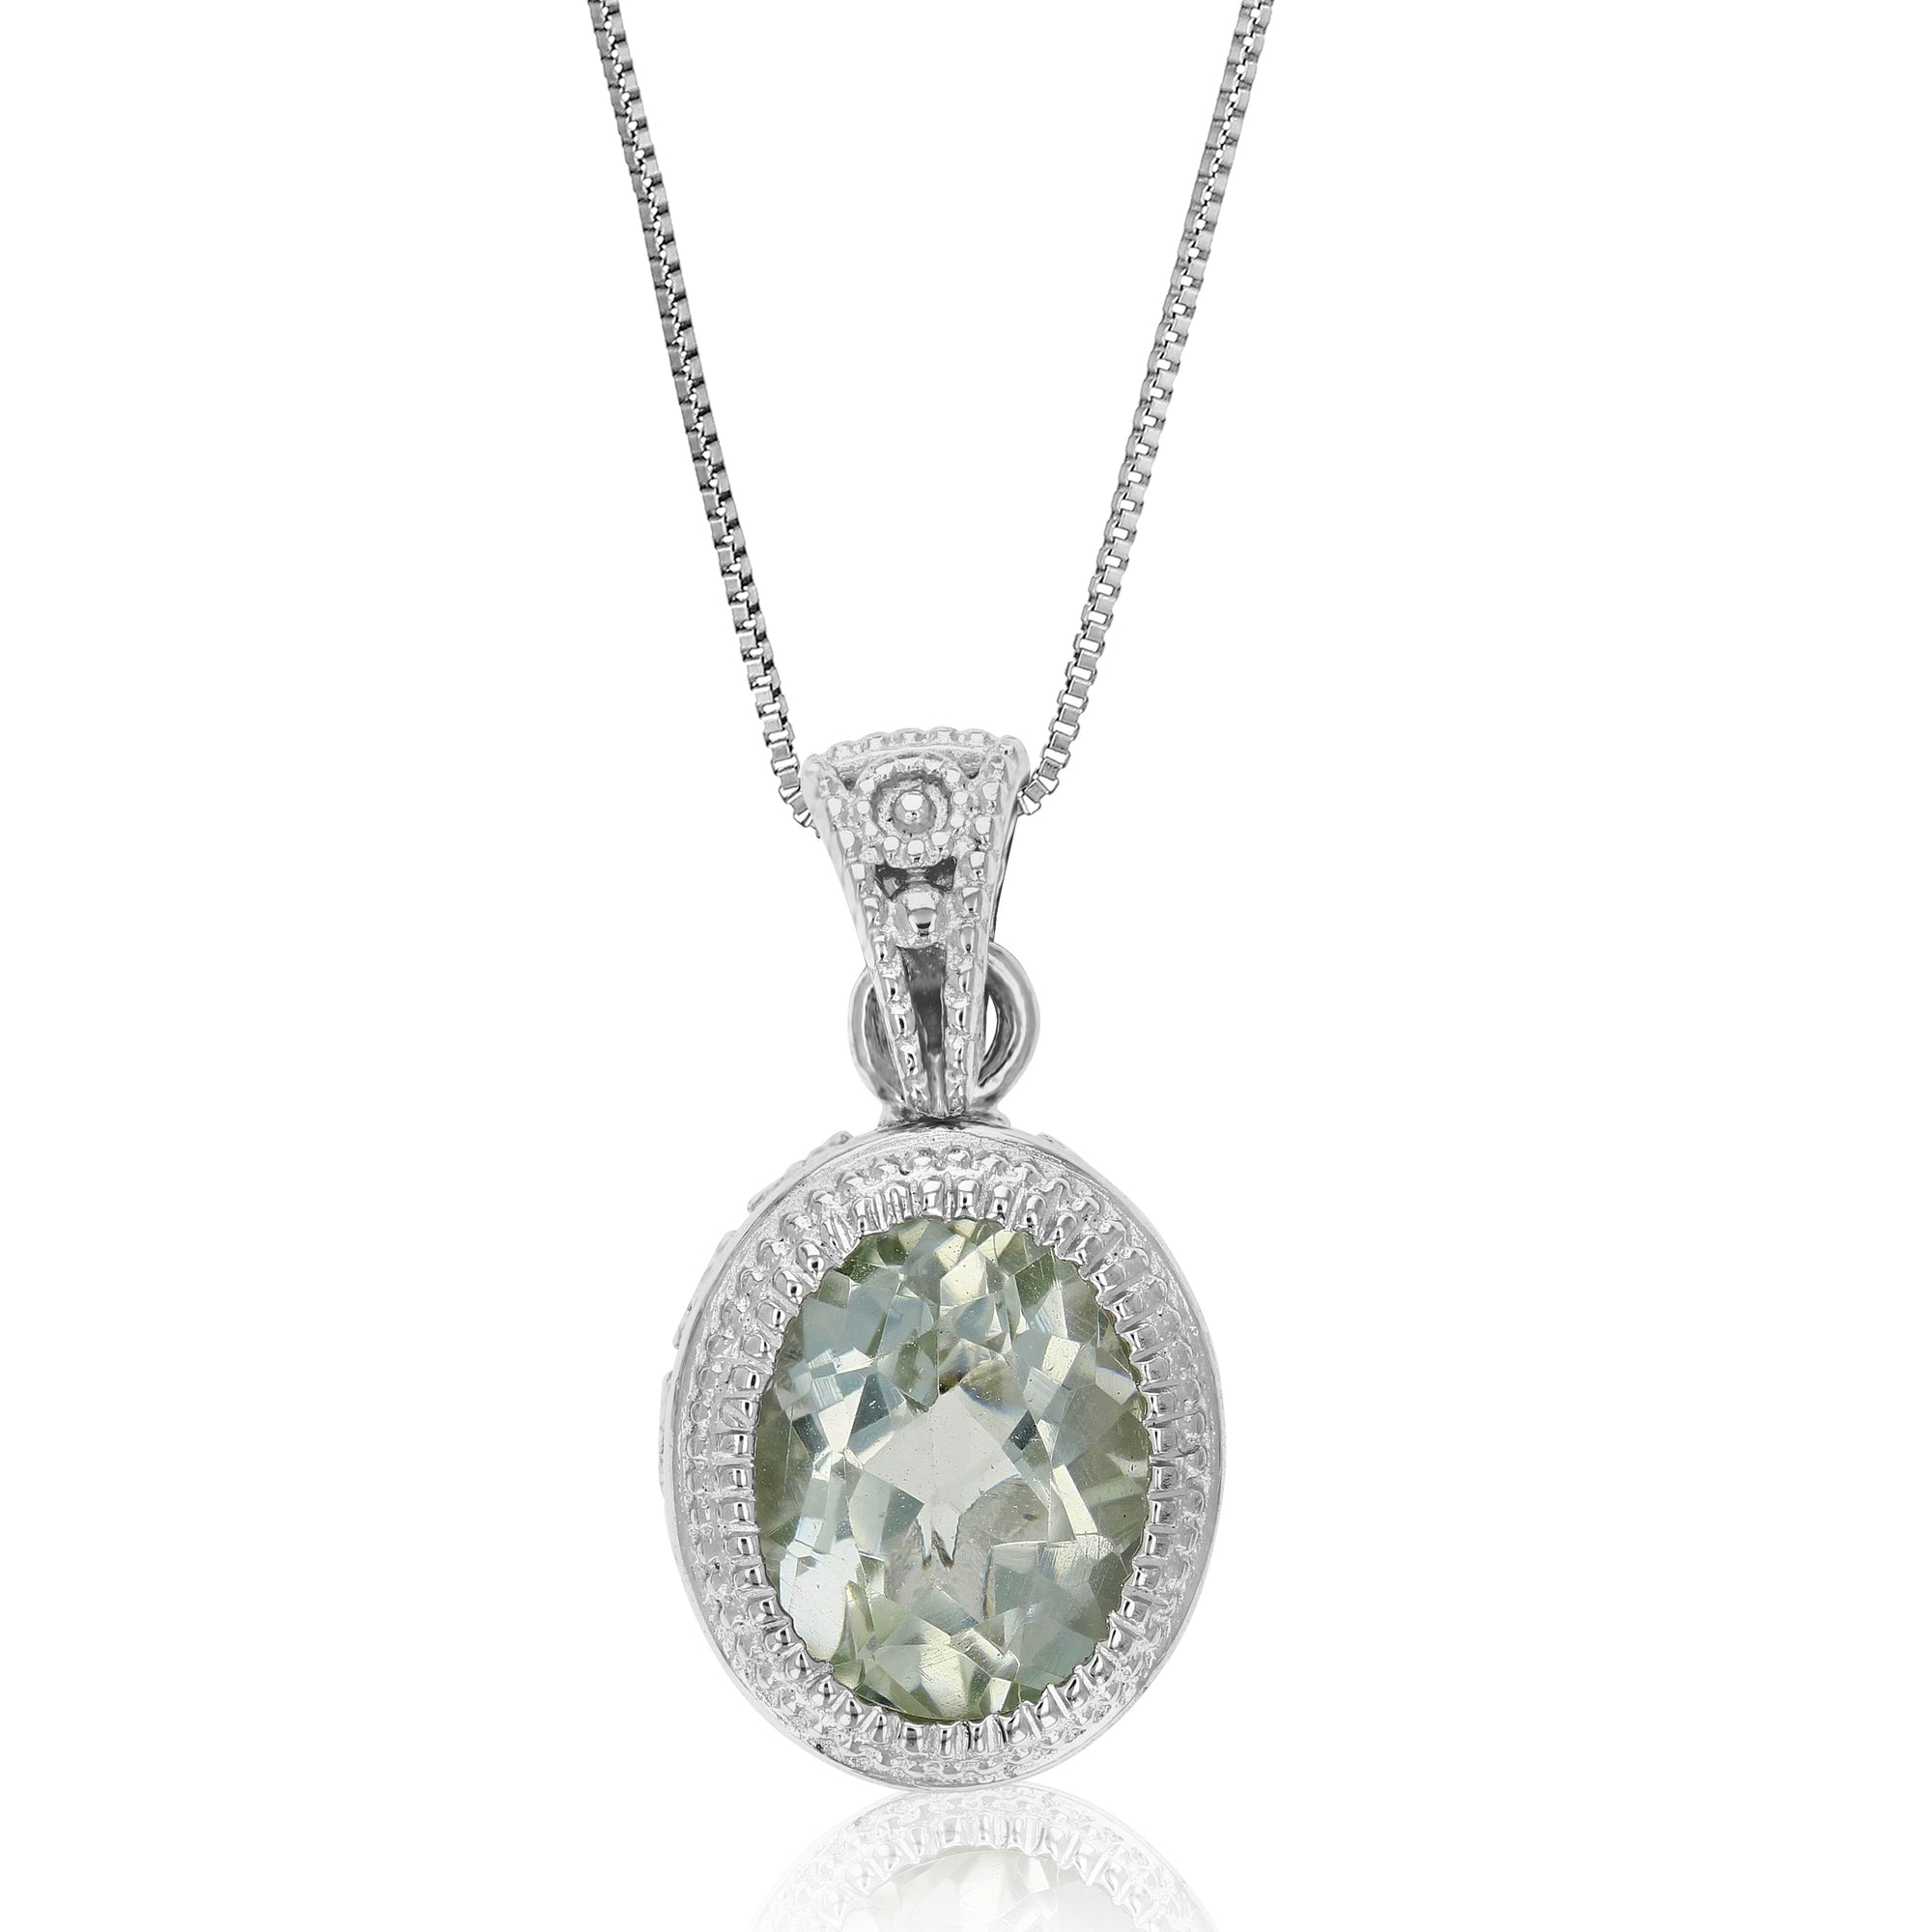 1.10 cttw Pendant Necklace, Green Amethyst Oval Pendant Necklace for Women in .925 Sterling Silver with Rhodium, 18 Inch Chain, Bezel Setting